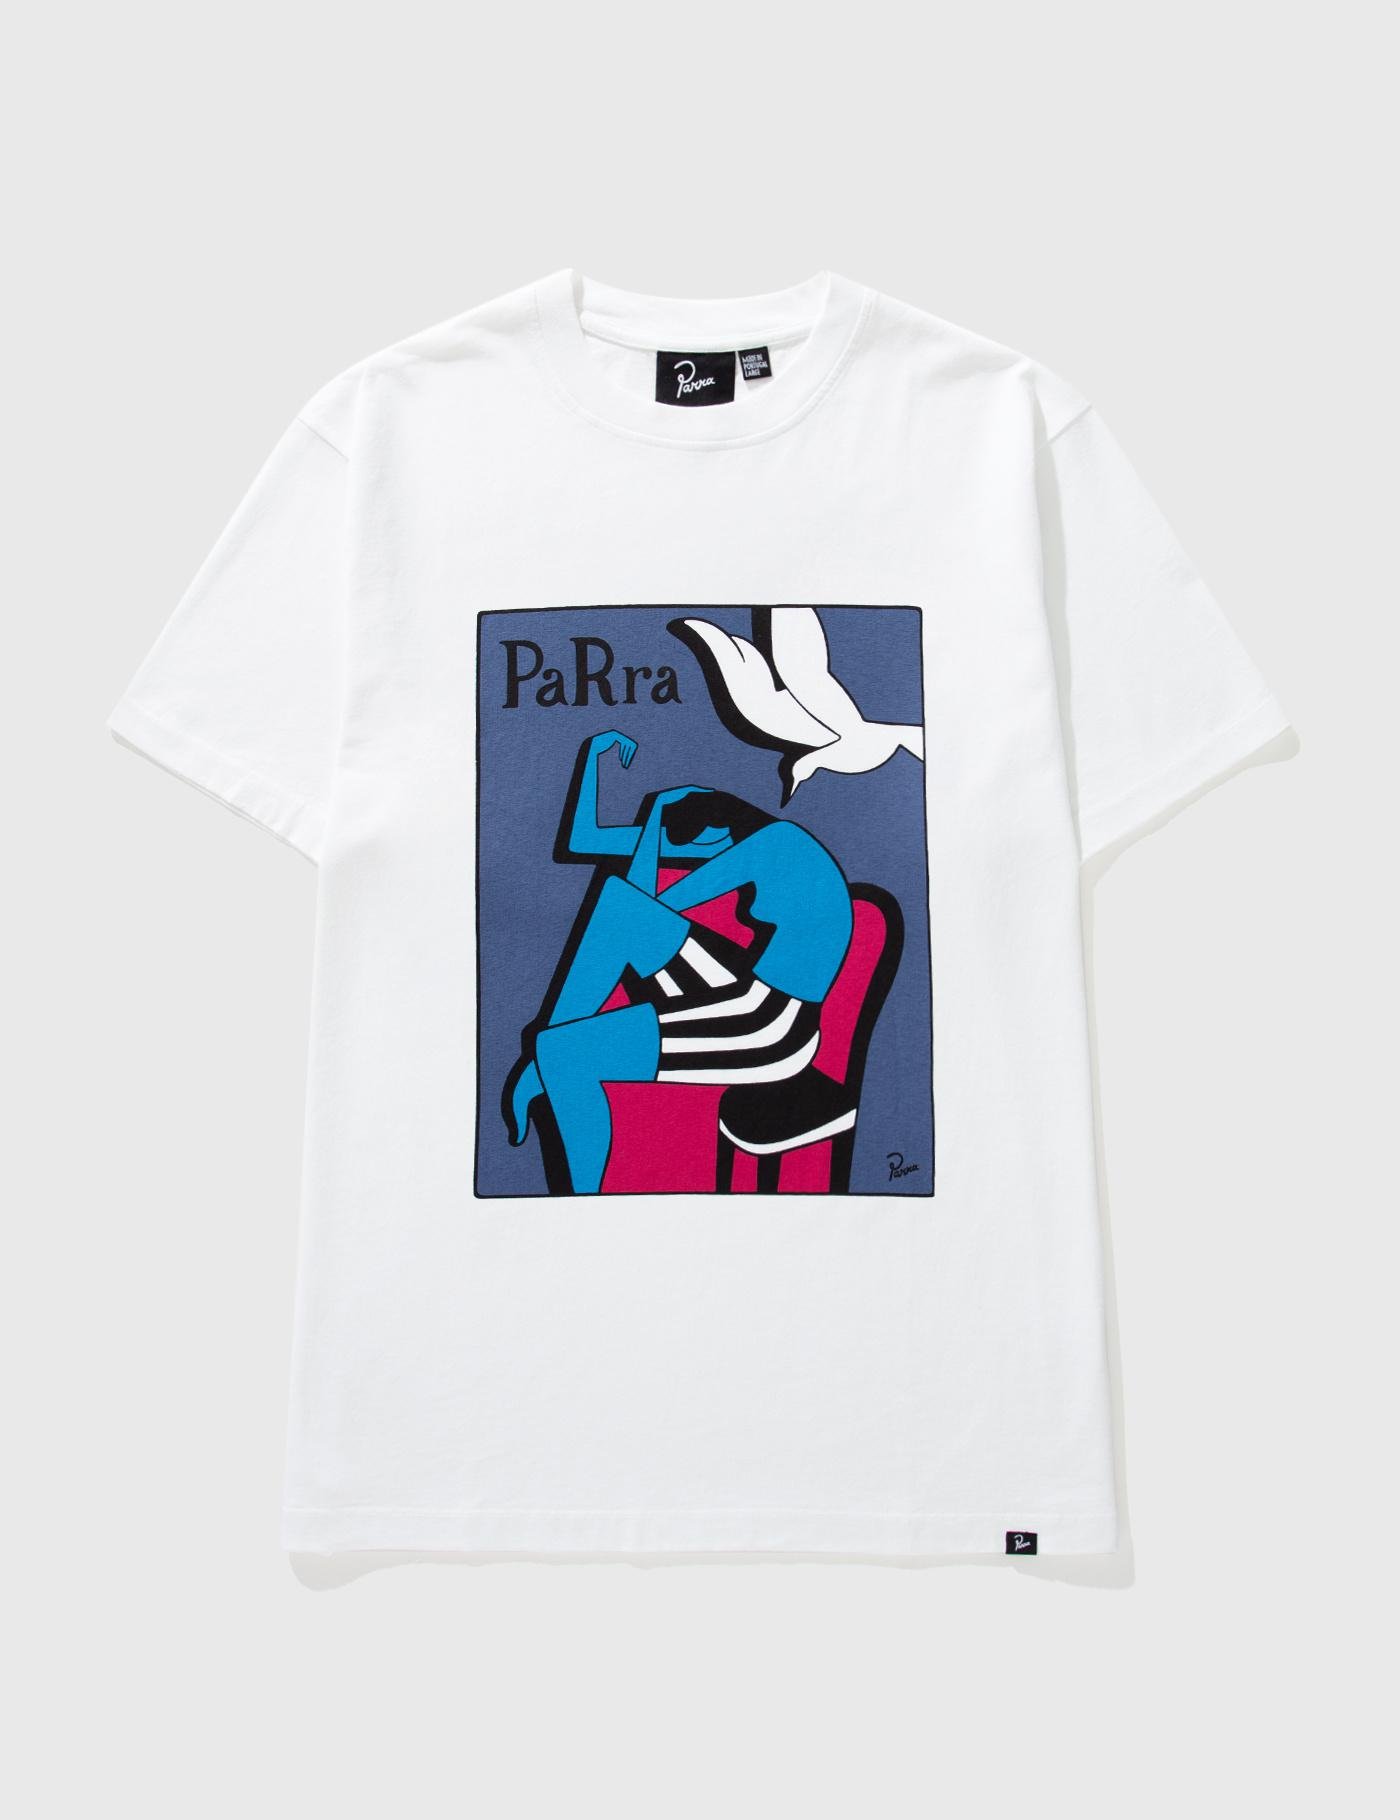 Bird Attack T-shirt by BY PARRA